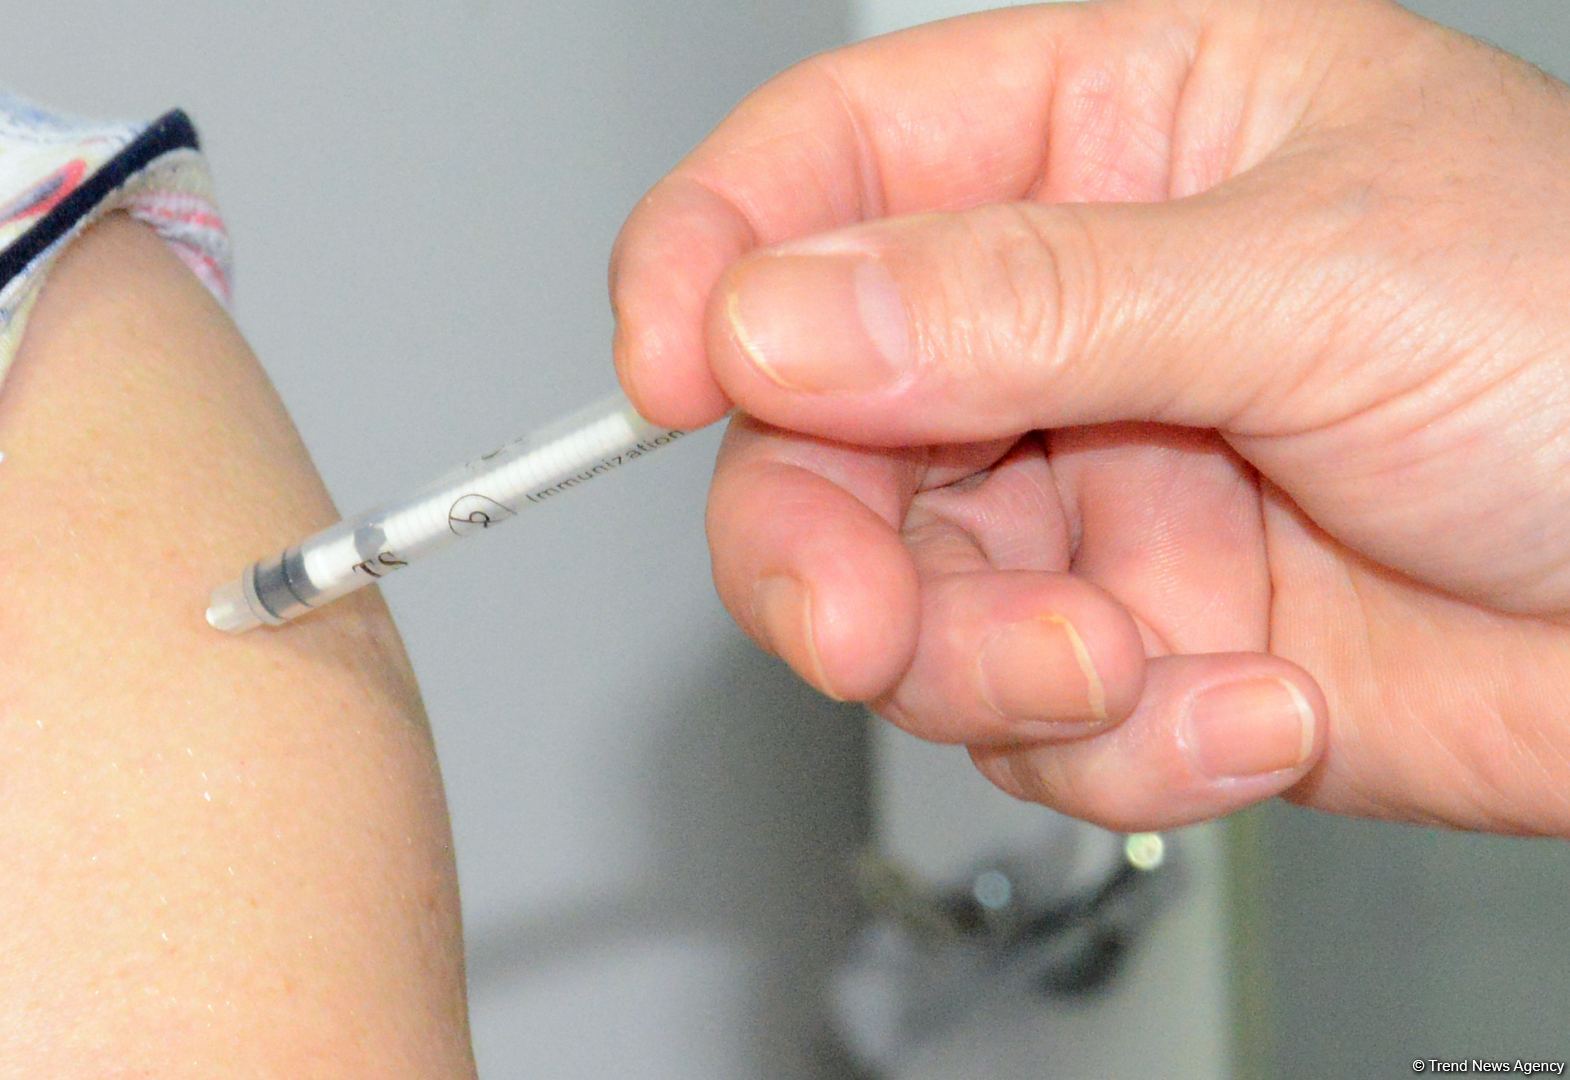 Azerbaijan has enough COVID-19 vaccination points and personnel - health ministry